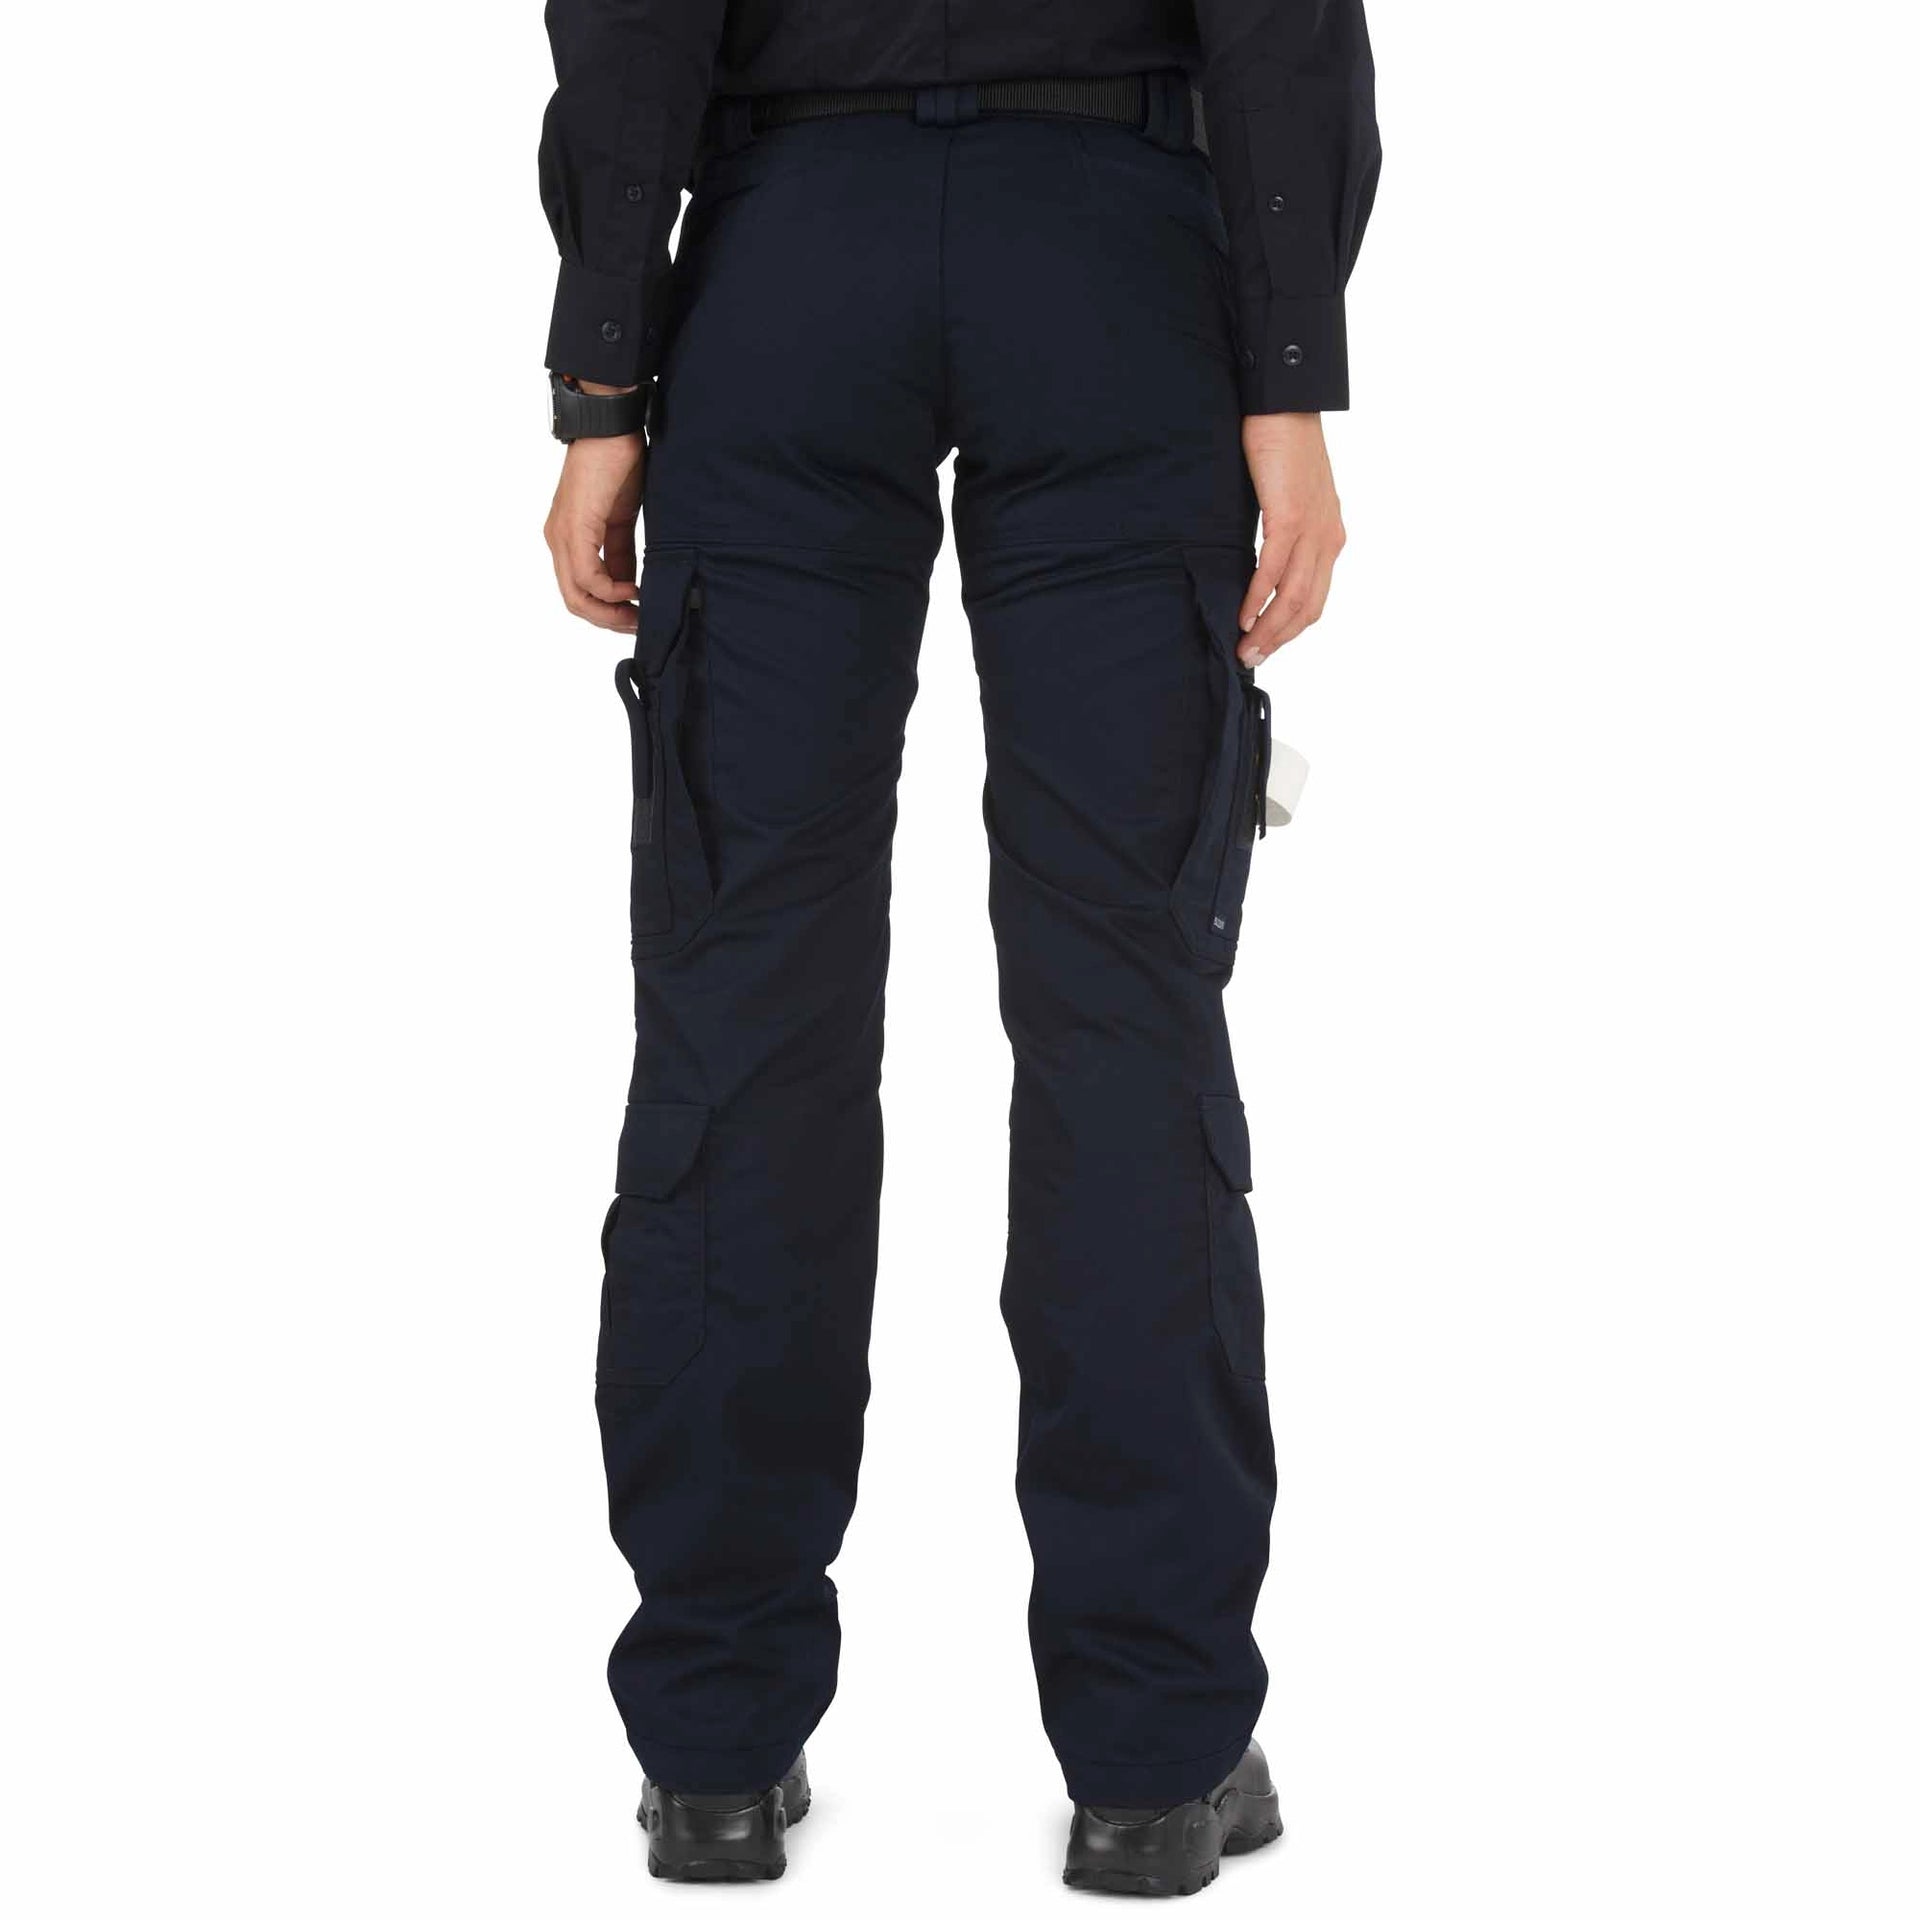 5.11 Tactical Women's TACLITE® EMS Pant (64369) | The Fire Center | Fuego Fire Center | FIREFIGHTER GEAR | Our EMS Pants are engineered with features, comfort, and performance you won’t find anywhere else. Available in a polyester/cotton twill or our Taclite® ripstop, treated with Teflon™ finish for stain and soil resistance.